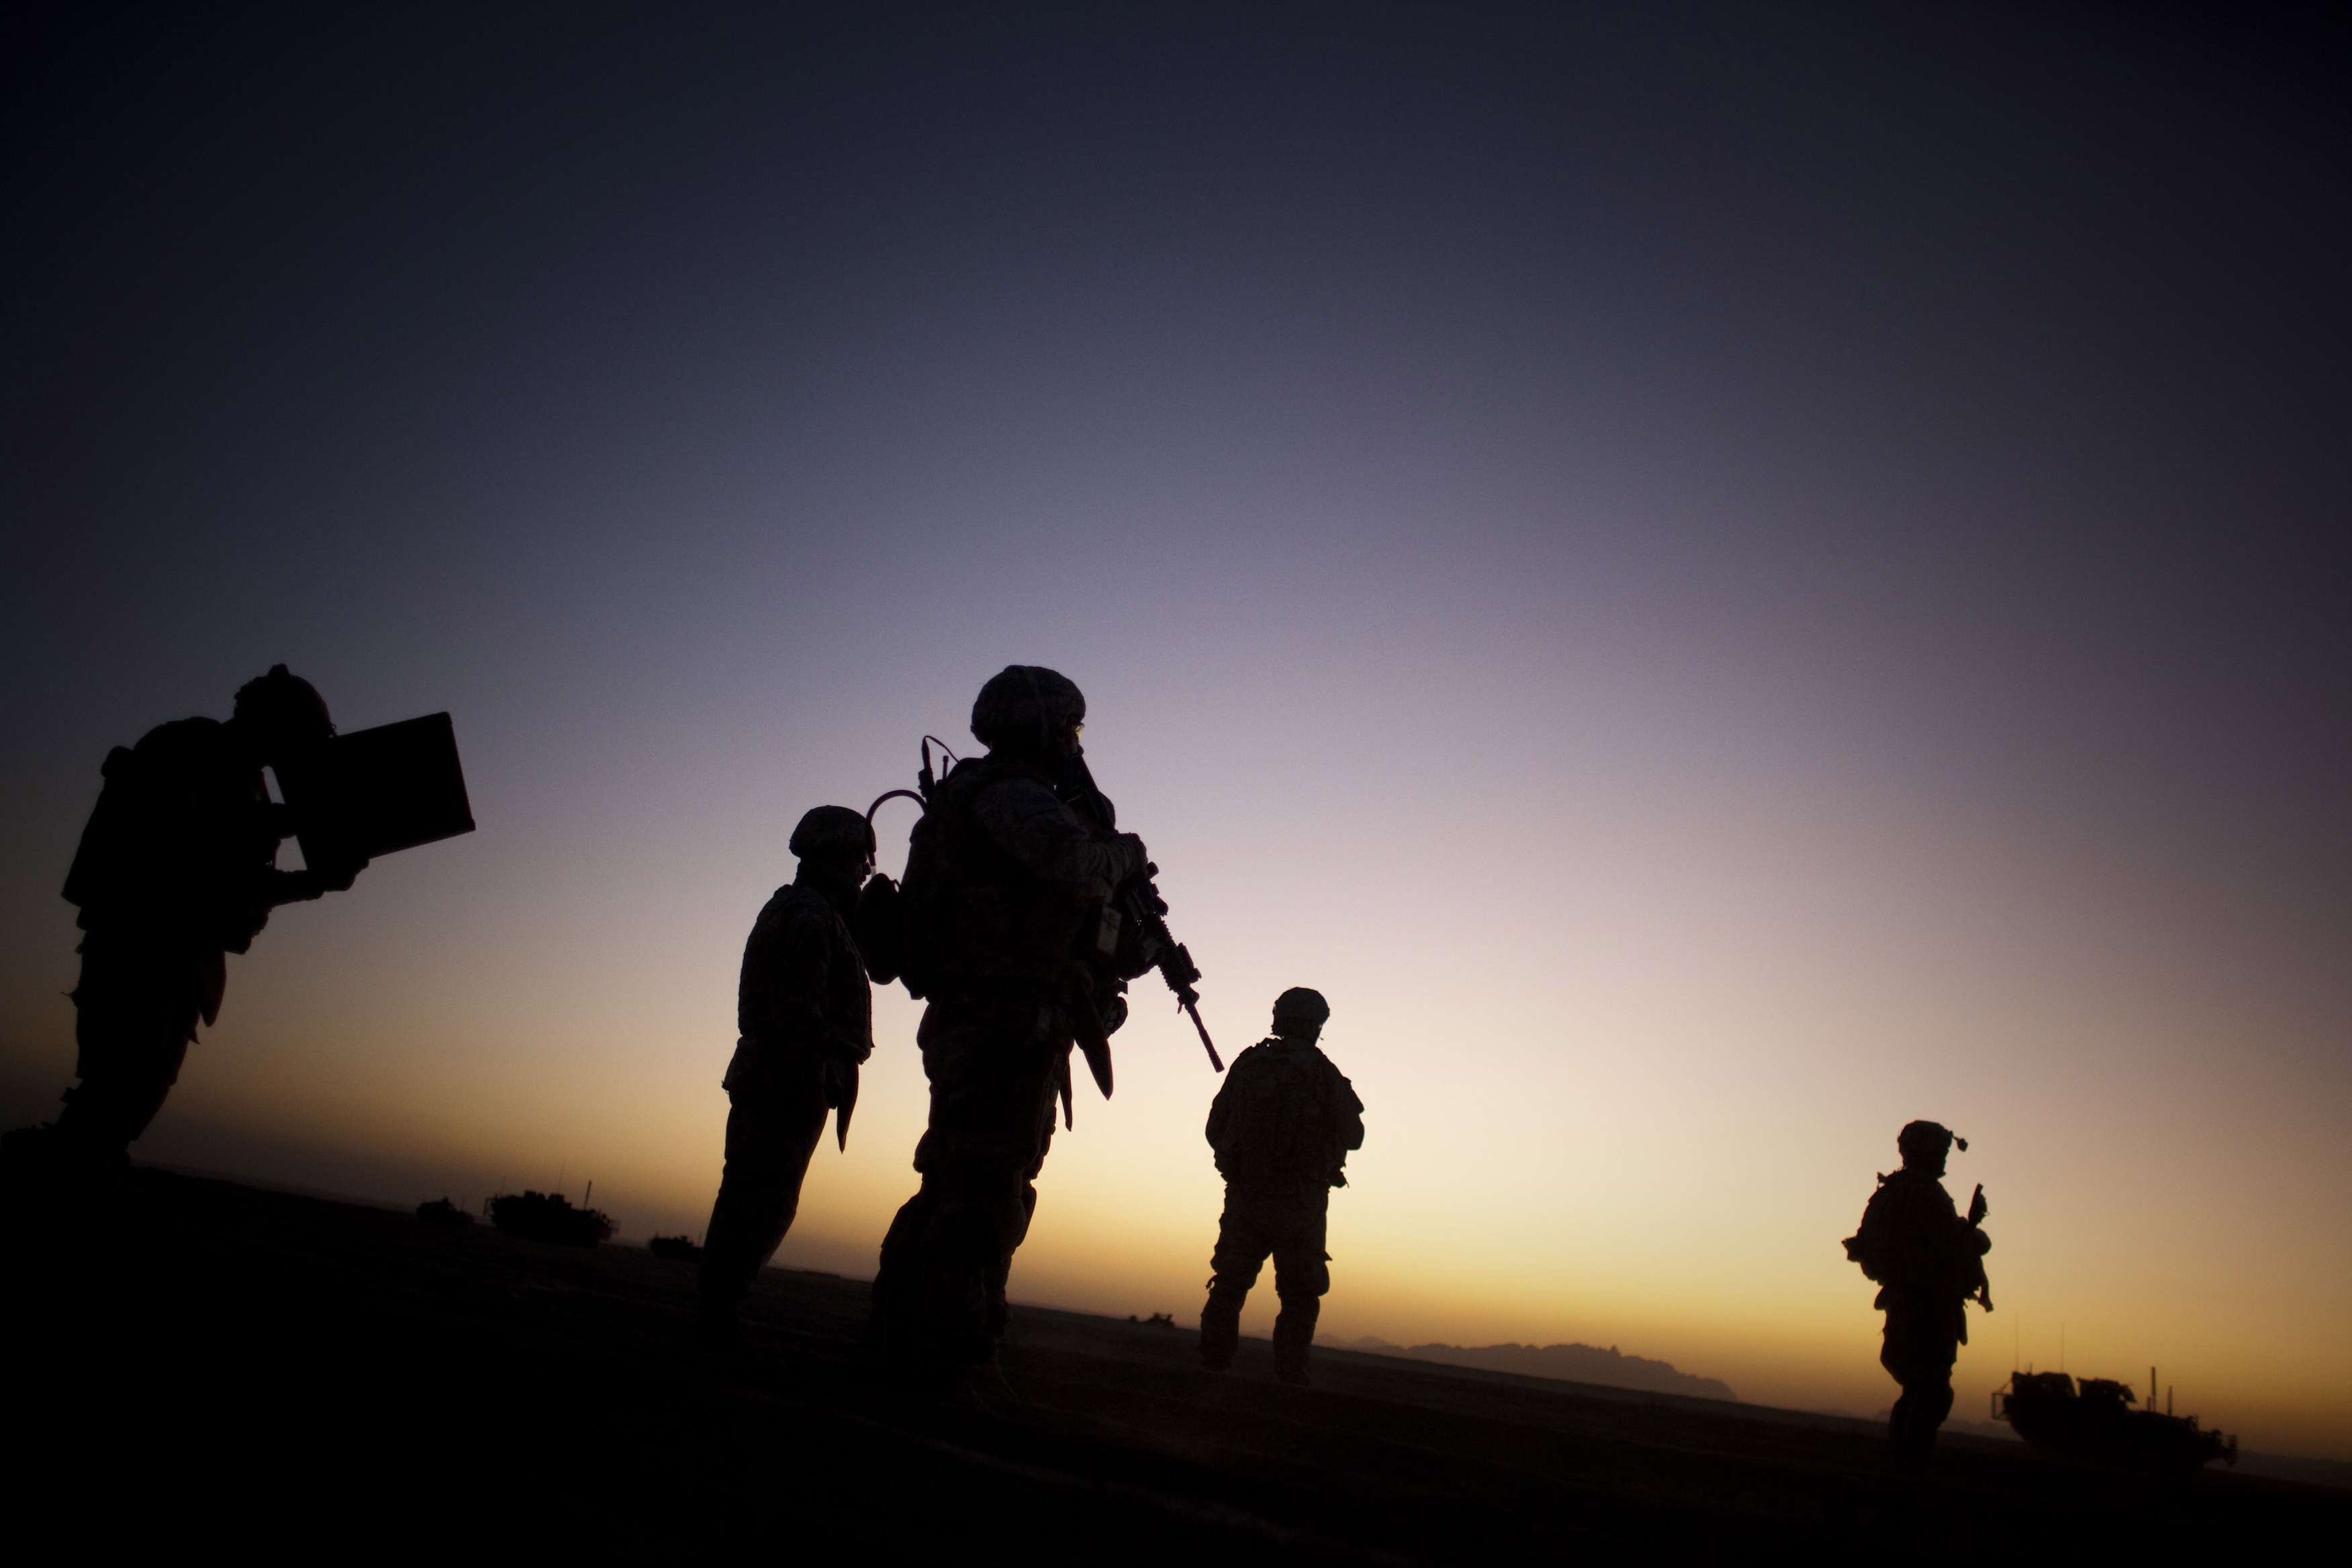 U.S. soldiers patrol the outskirts of Spin Boldak, near the border with Pakistan, about 63 miles southeast of Kandahar, Afghanistan, in 2009. The U.S.